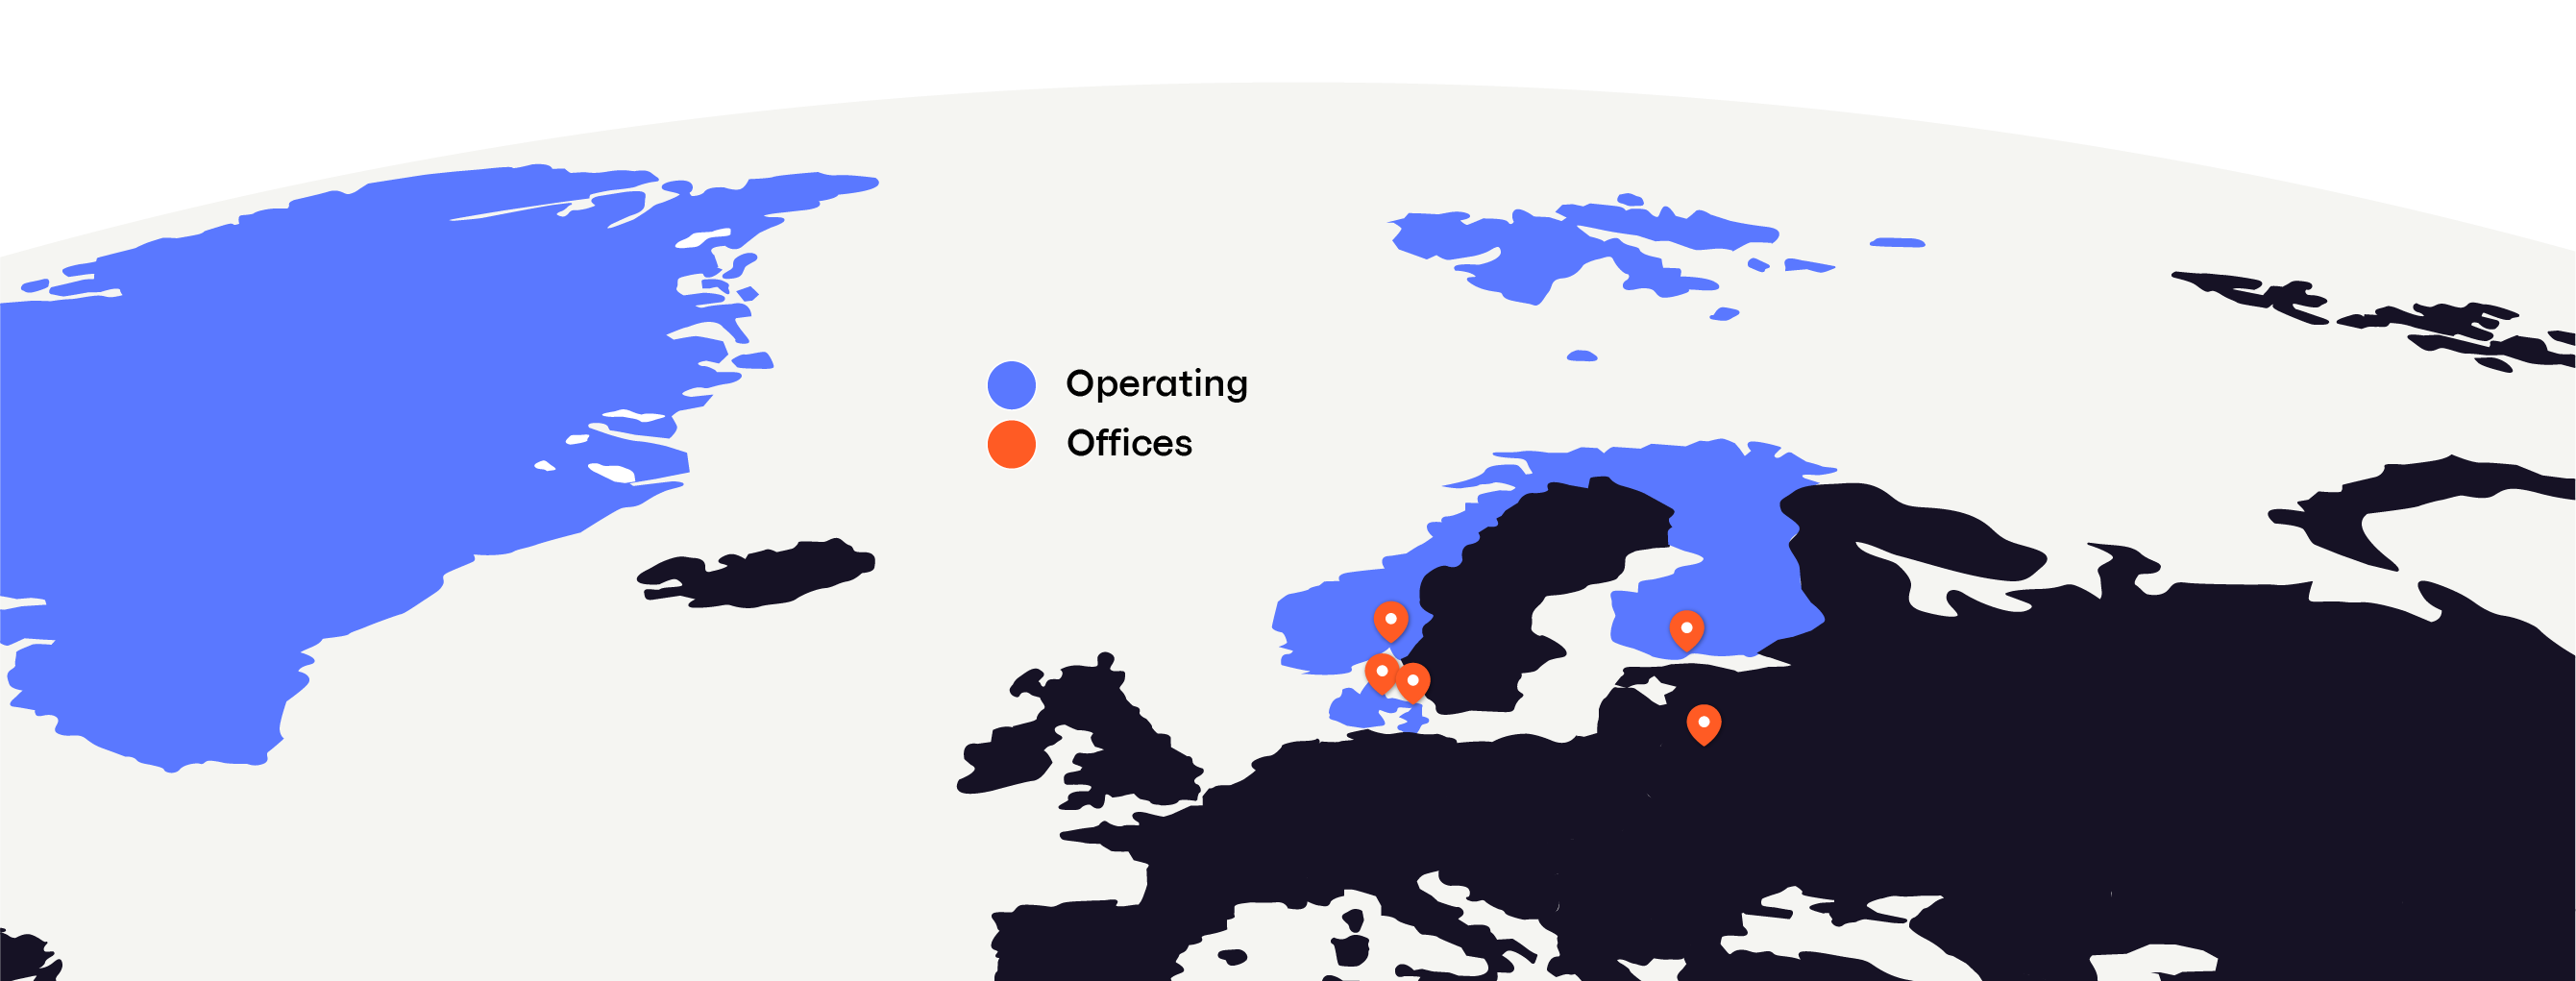 Map showing Vipps MobilePay markets and offices.